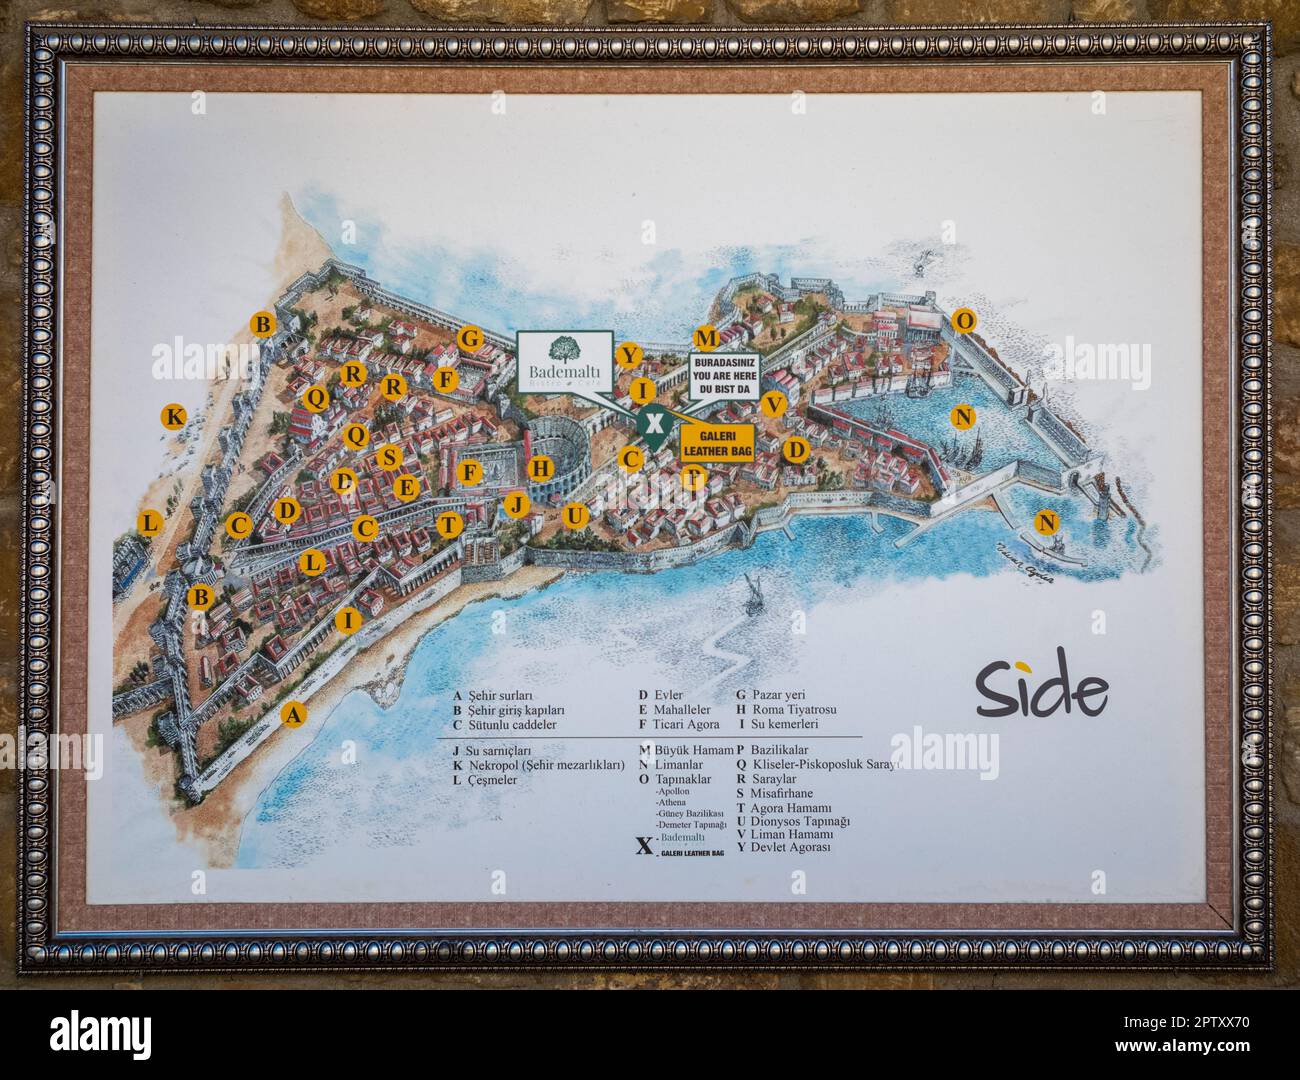 A hand painted tourist map of Side in Antalya province in Turkey (Turkiye). The map lists all the key sights in the ancient Roman city and what is now Stock Photo